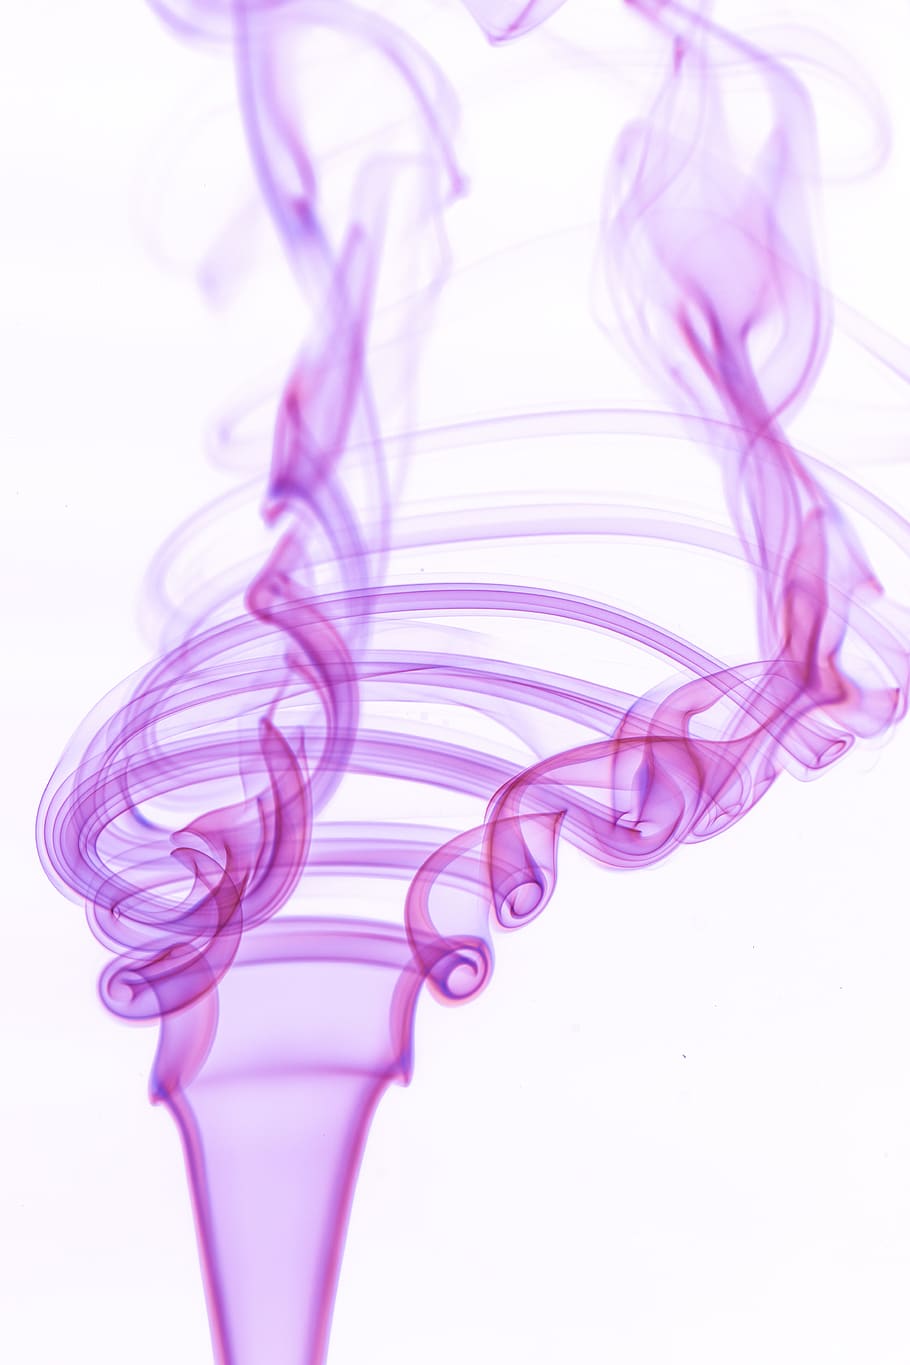 smoke, fire, burning, lighter, flame, incense, smoke - physical structure, white background, studio shot, pink color